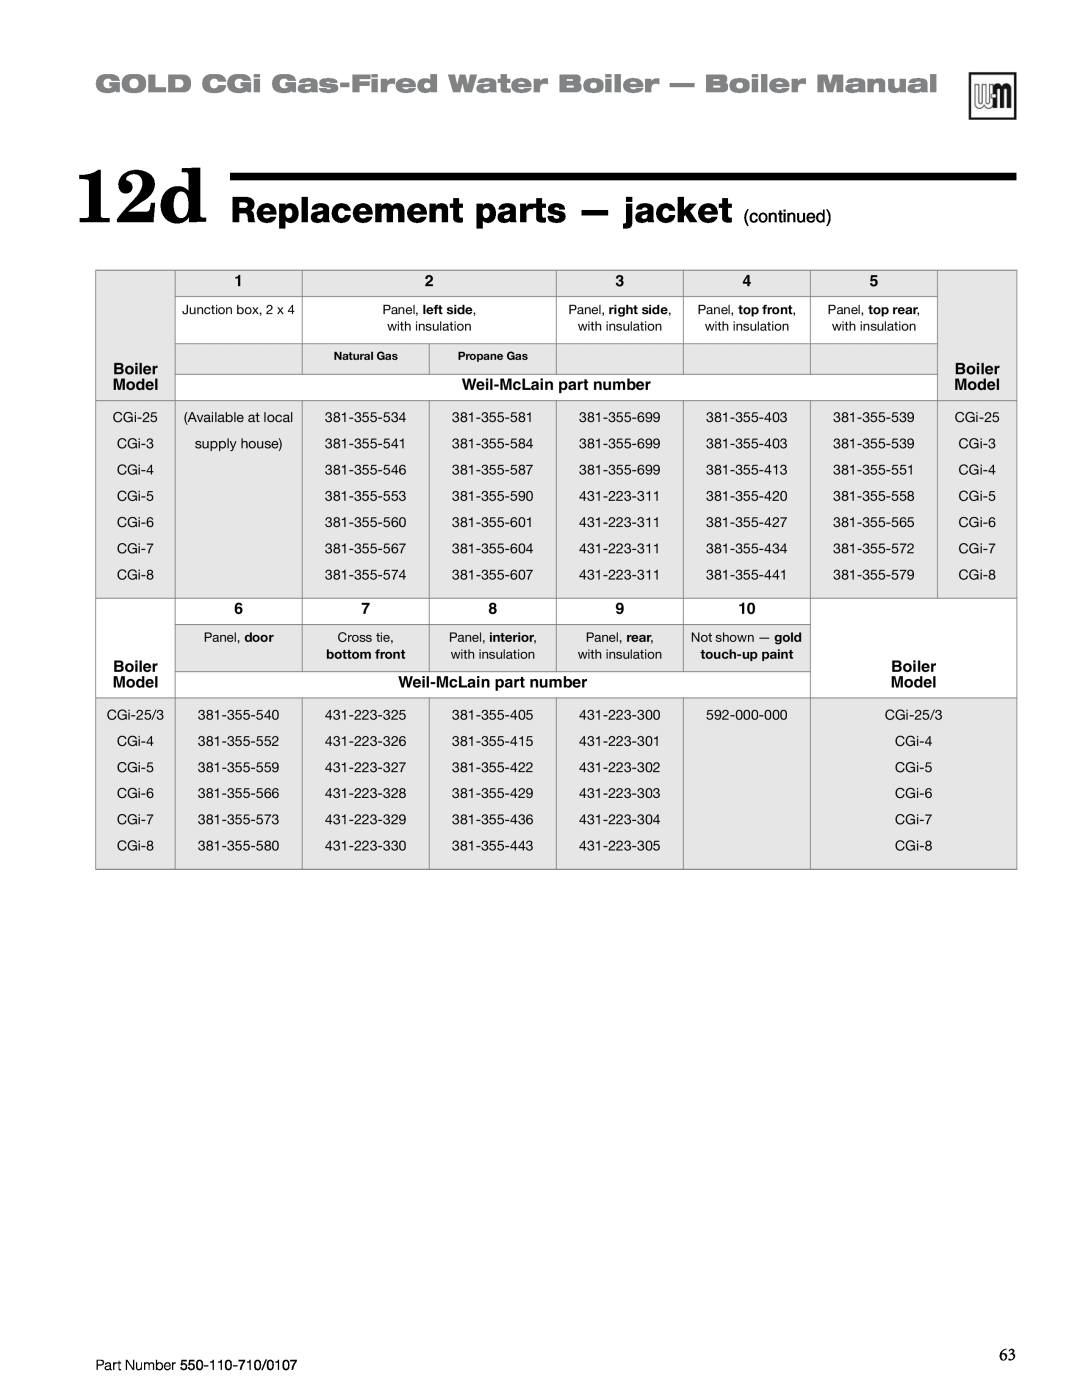 Weil-McLain Series 2 manual 12d Replacement parts — jacket continued, GOLD CGi Gas-FiredWater Boiler — Boiler Manual 